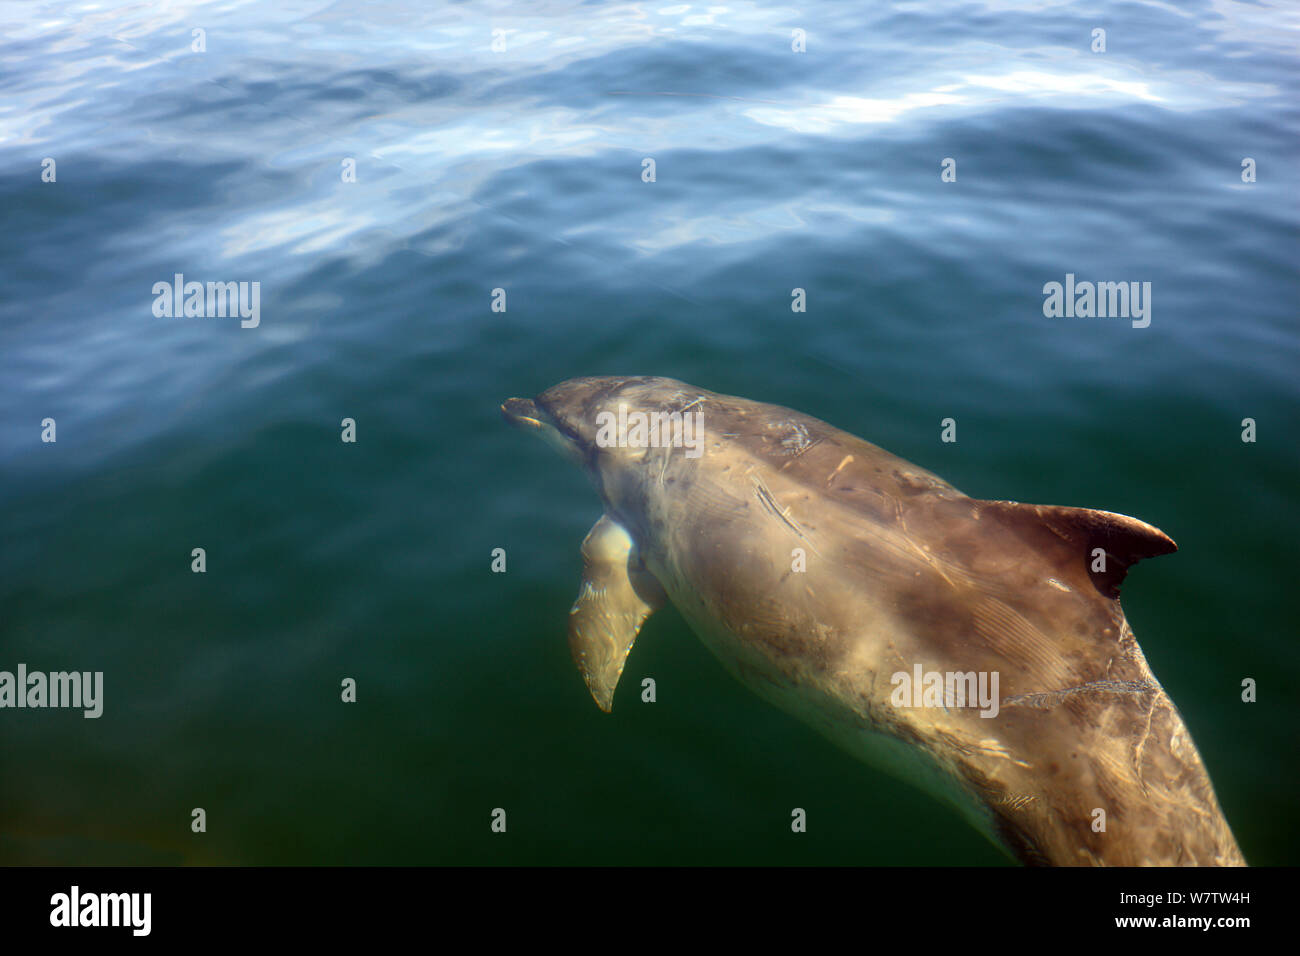 Bottlenose dolphin underwater in the clear Scottish seas of the Sound of Iona between the Isles of Mull & Iona. Many scars are clearly visible. Stock Photo